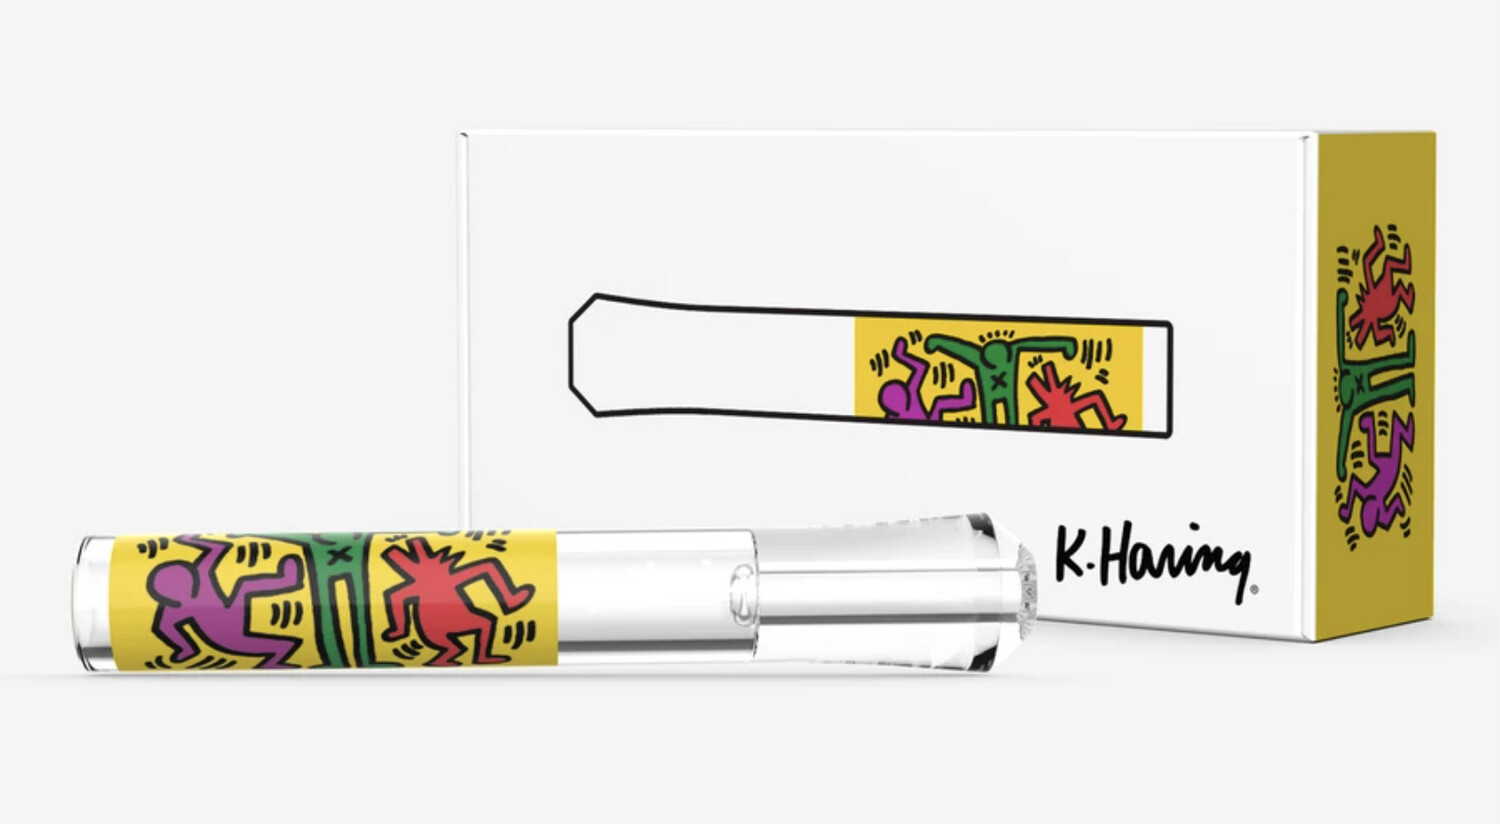 K. Haring. Taster, Color: Yellow